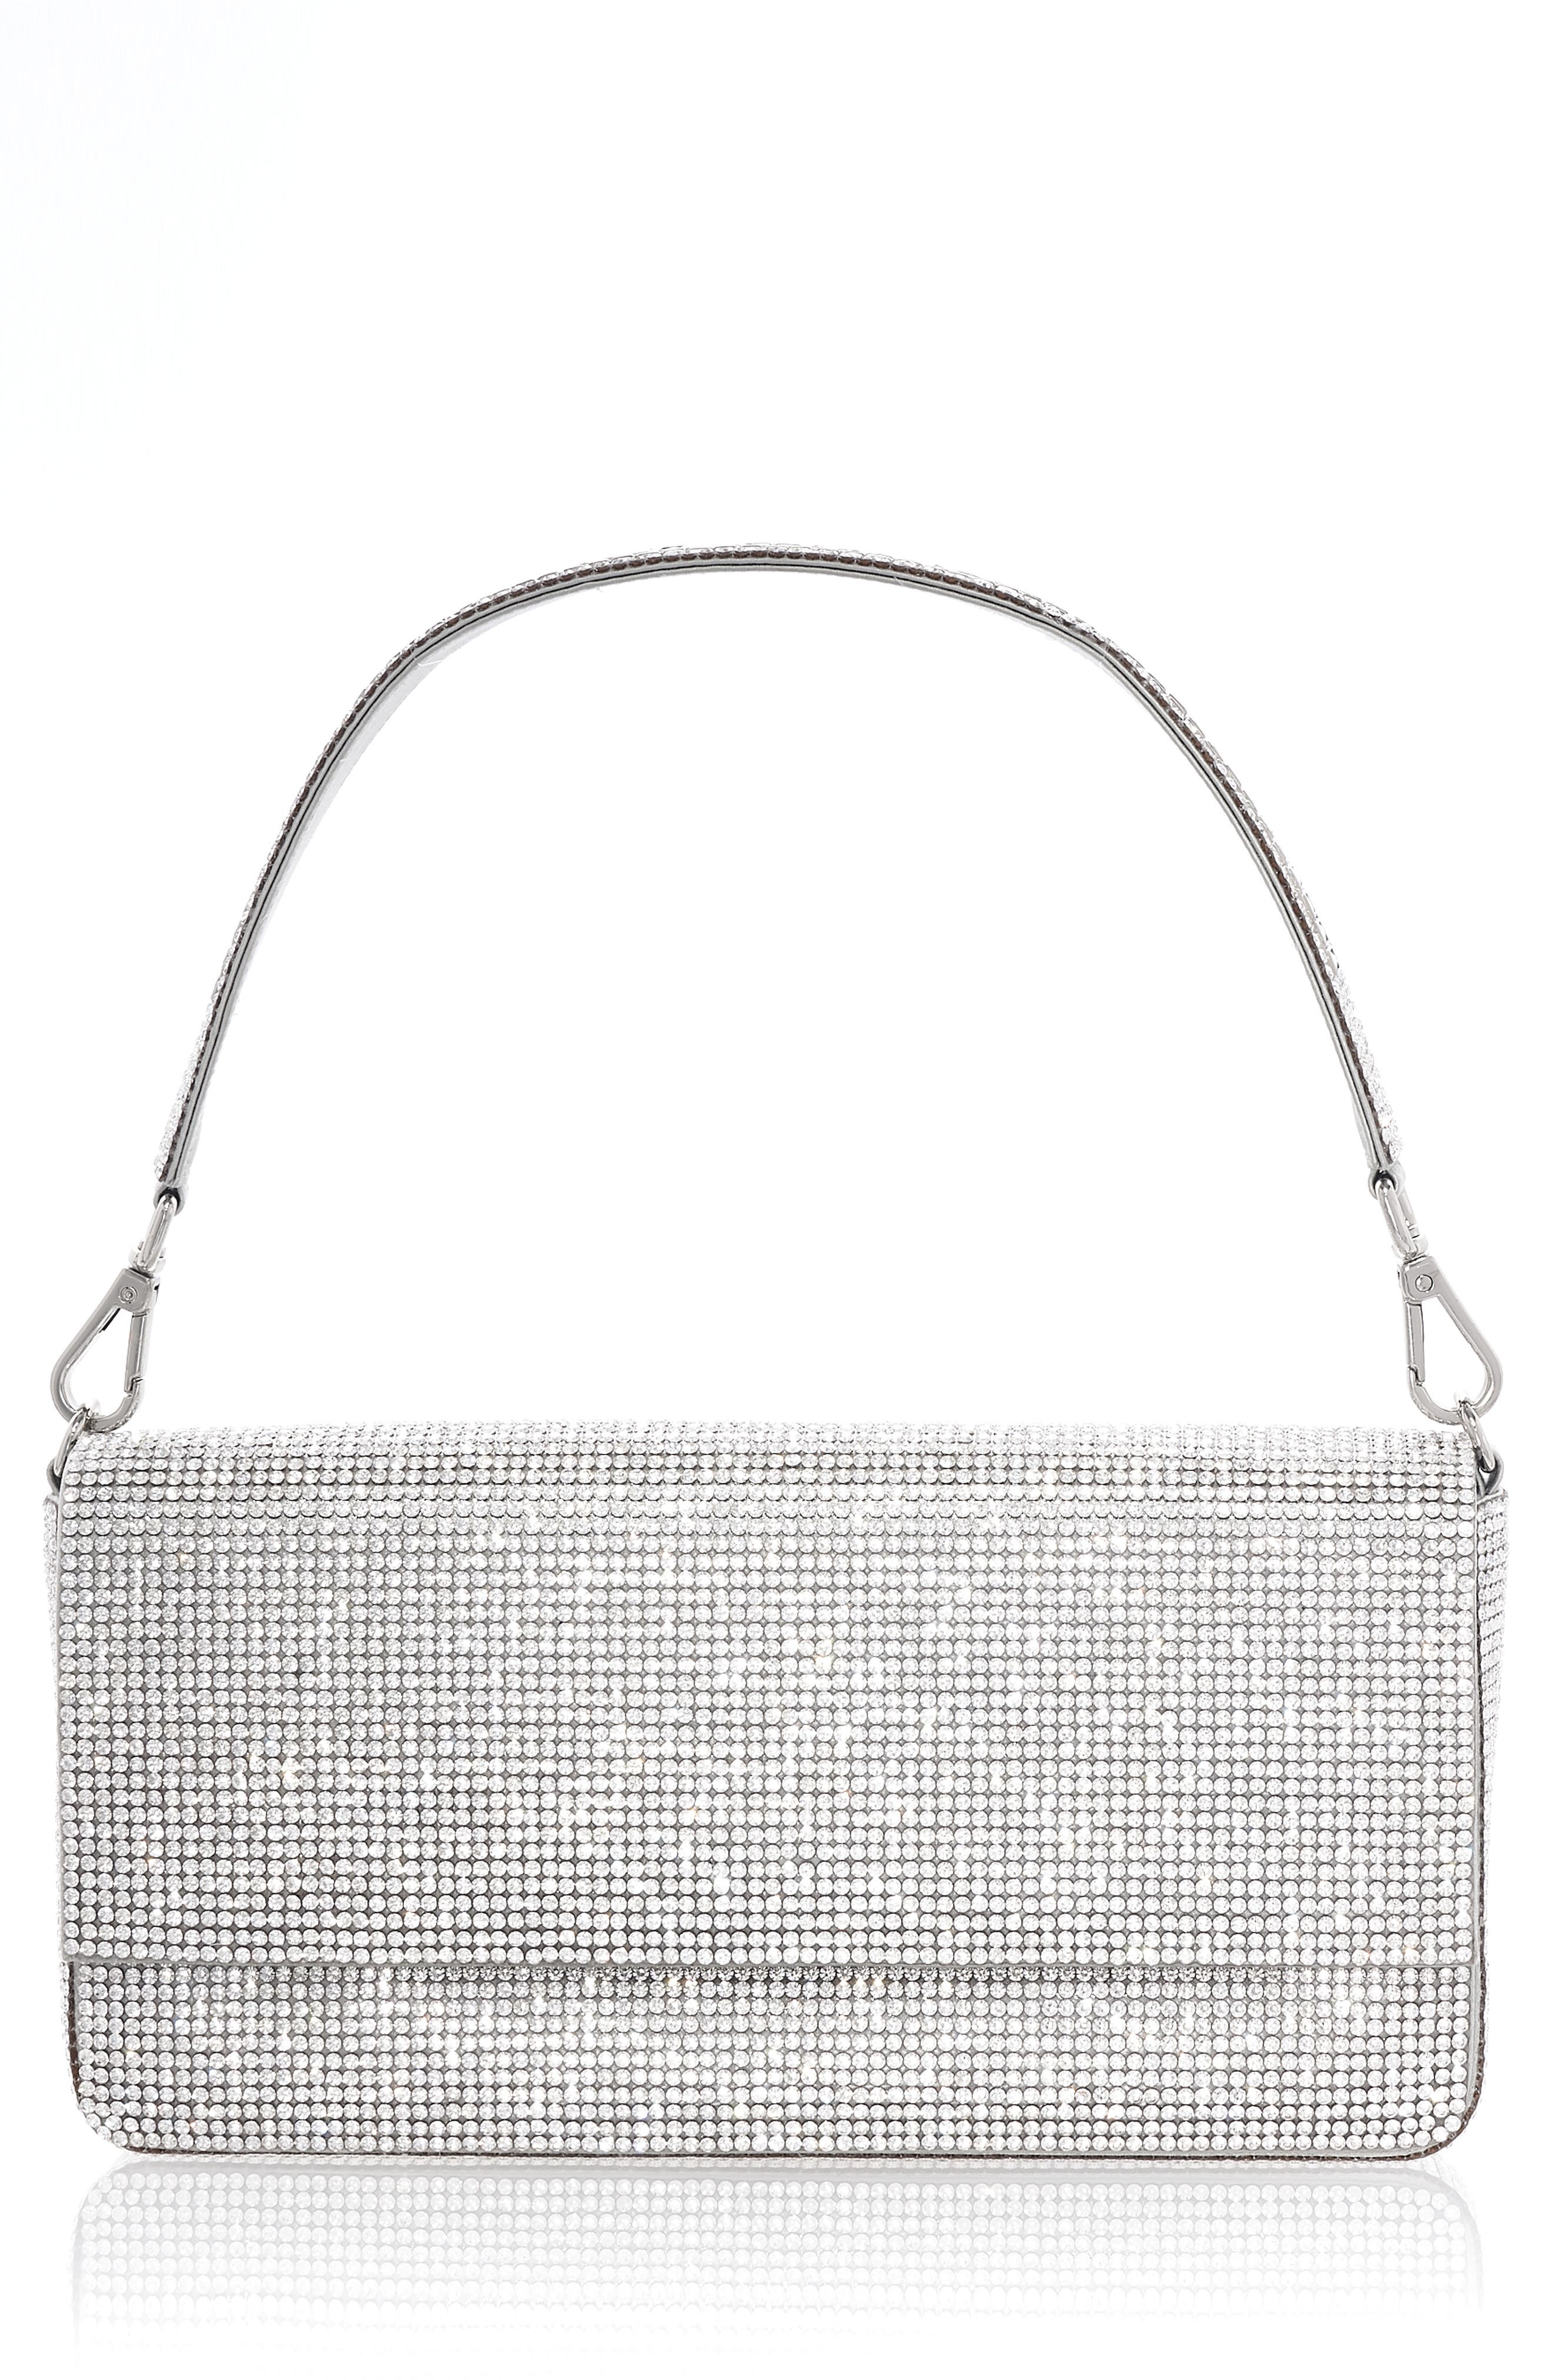 Judith Leiber Couture Hot Lips Crystal Clutch Bag